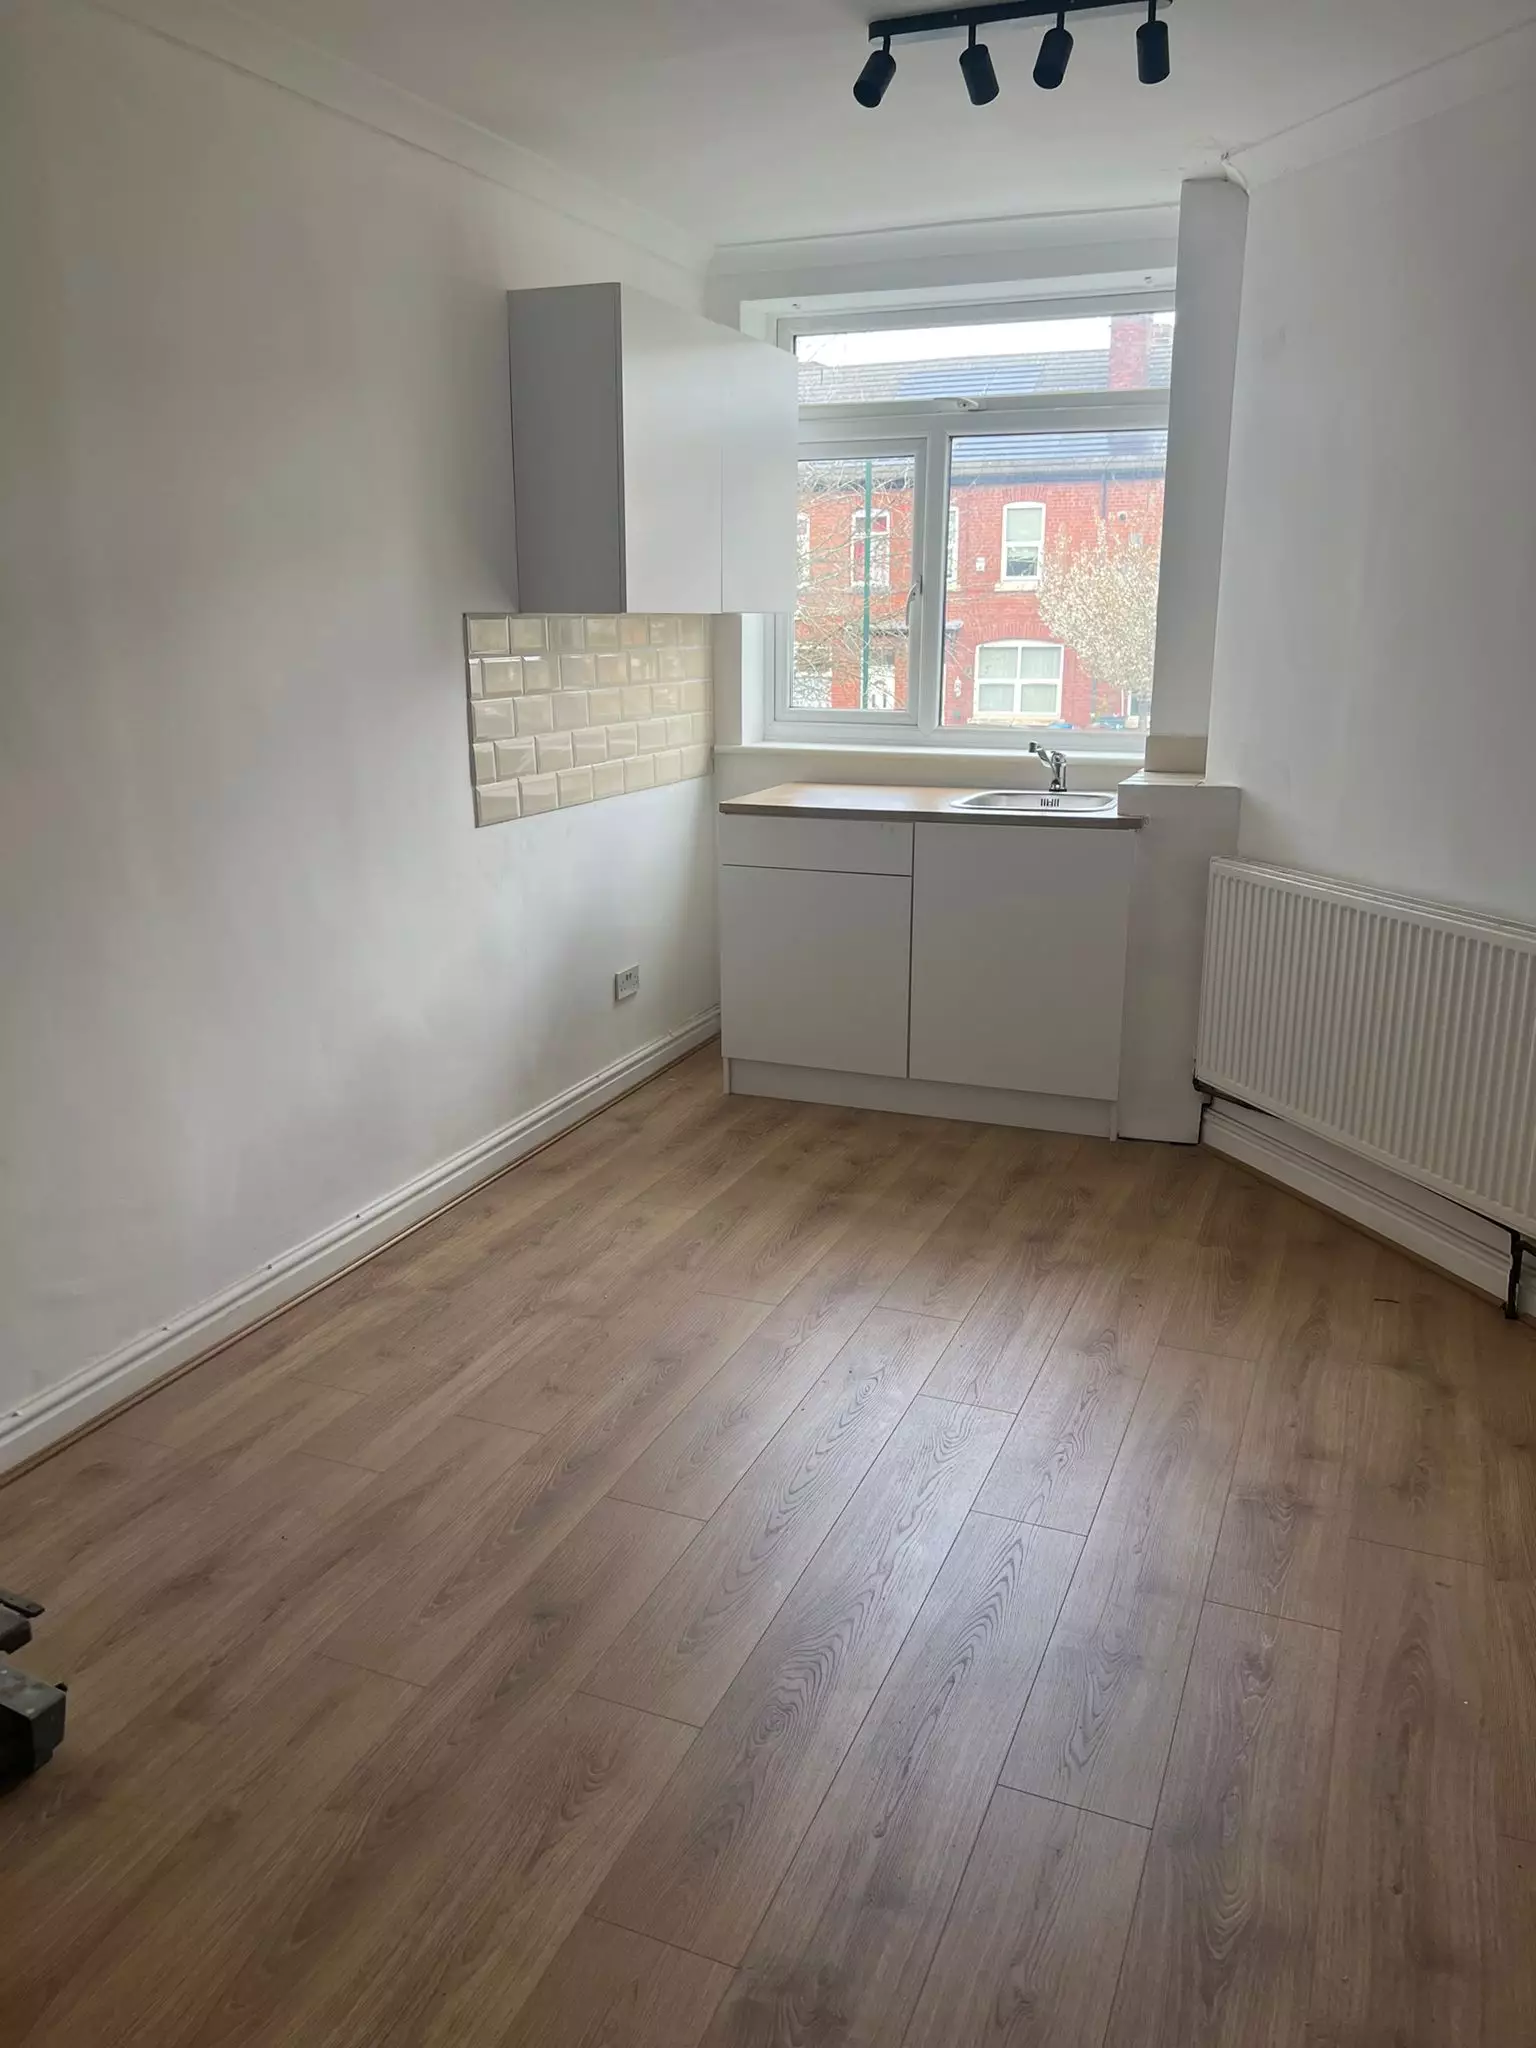 Photo 2 of Private floor in 3 storey house, 5 minutes distance from the Northern Quarter! located at Ash Street, Manchester M9 5XY, UK